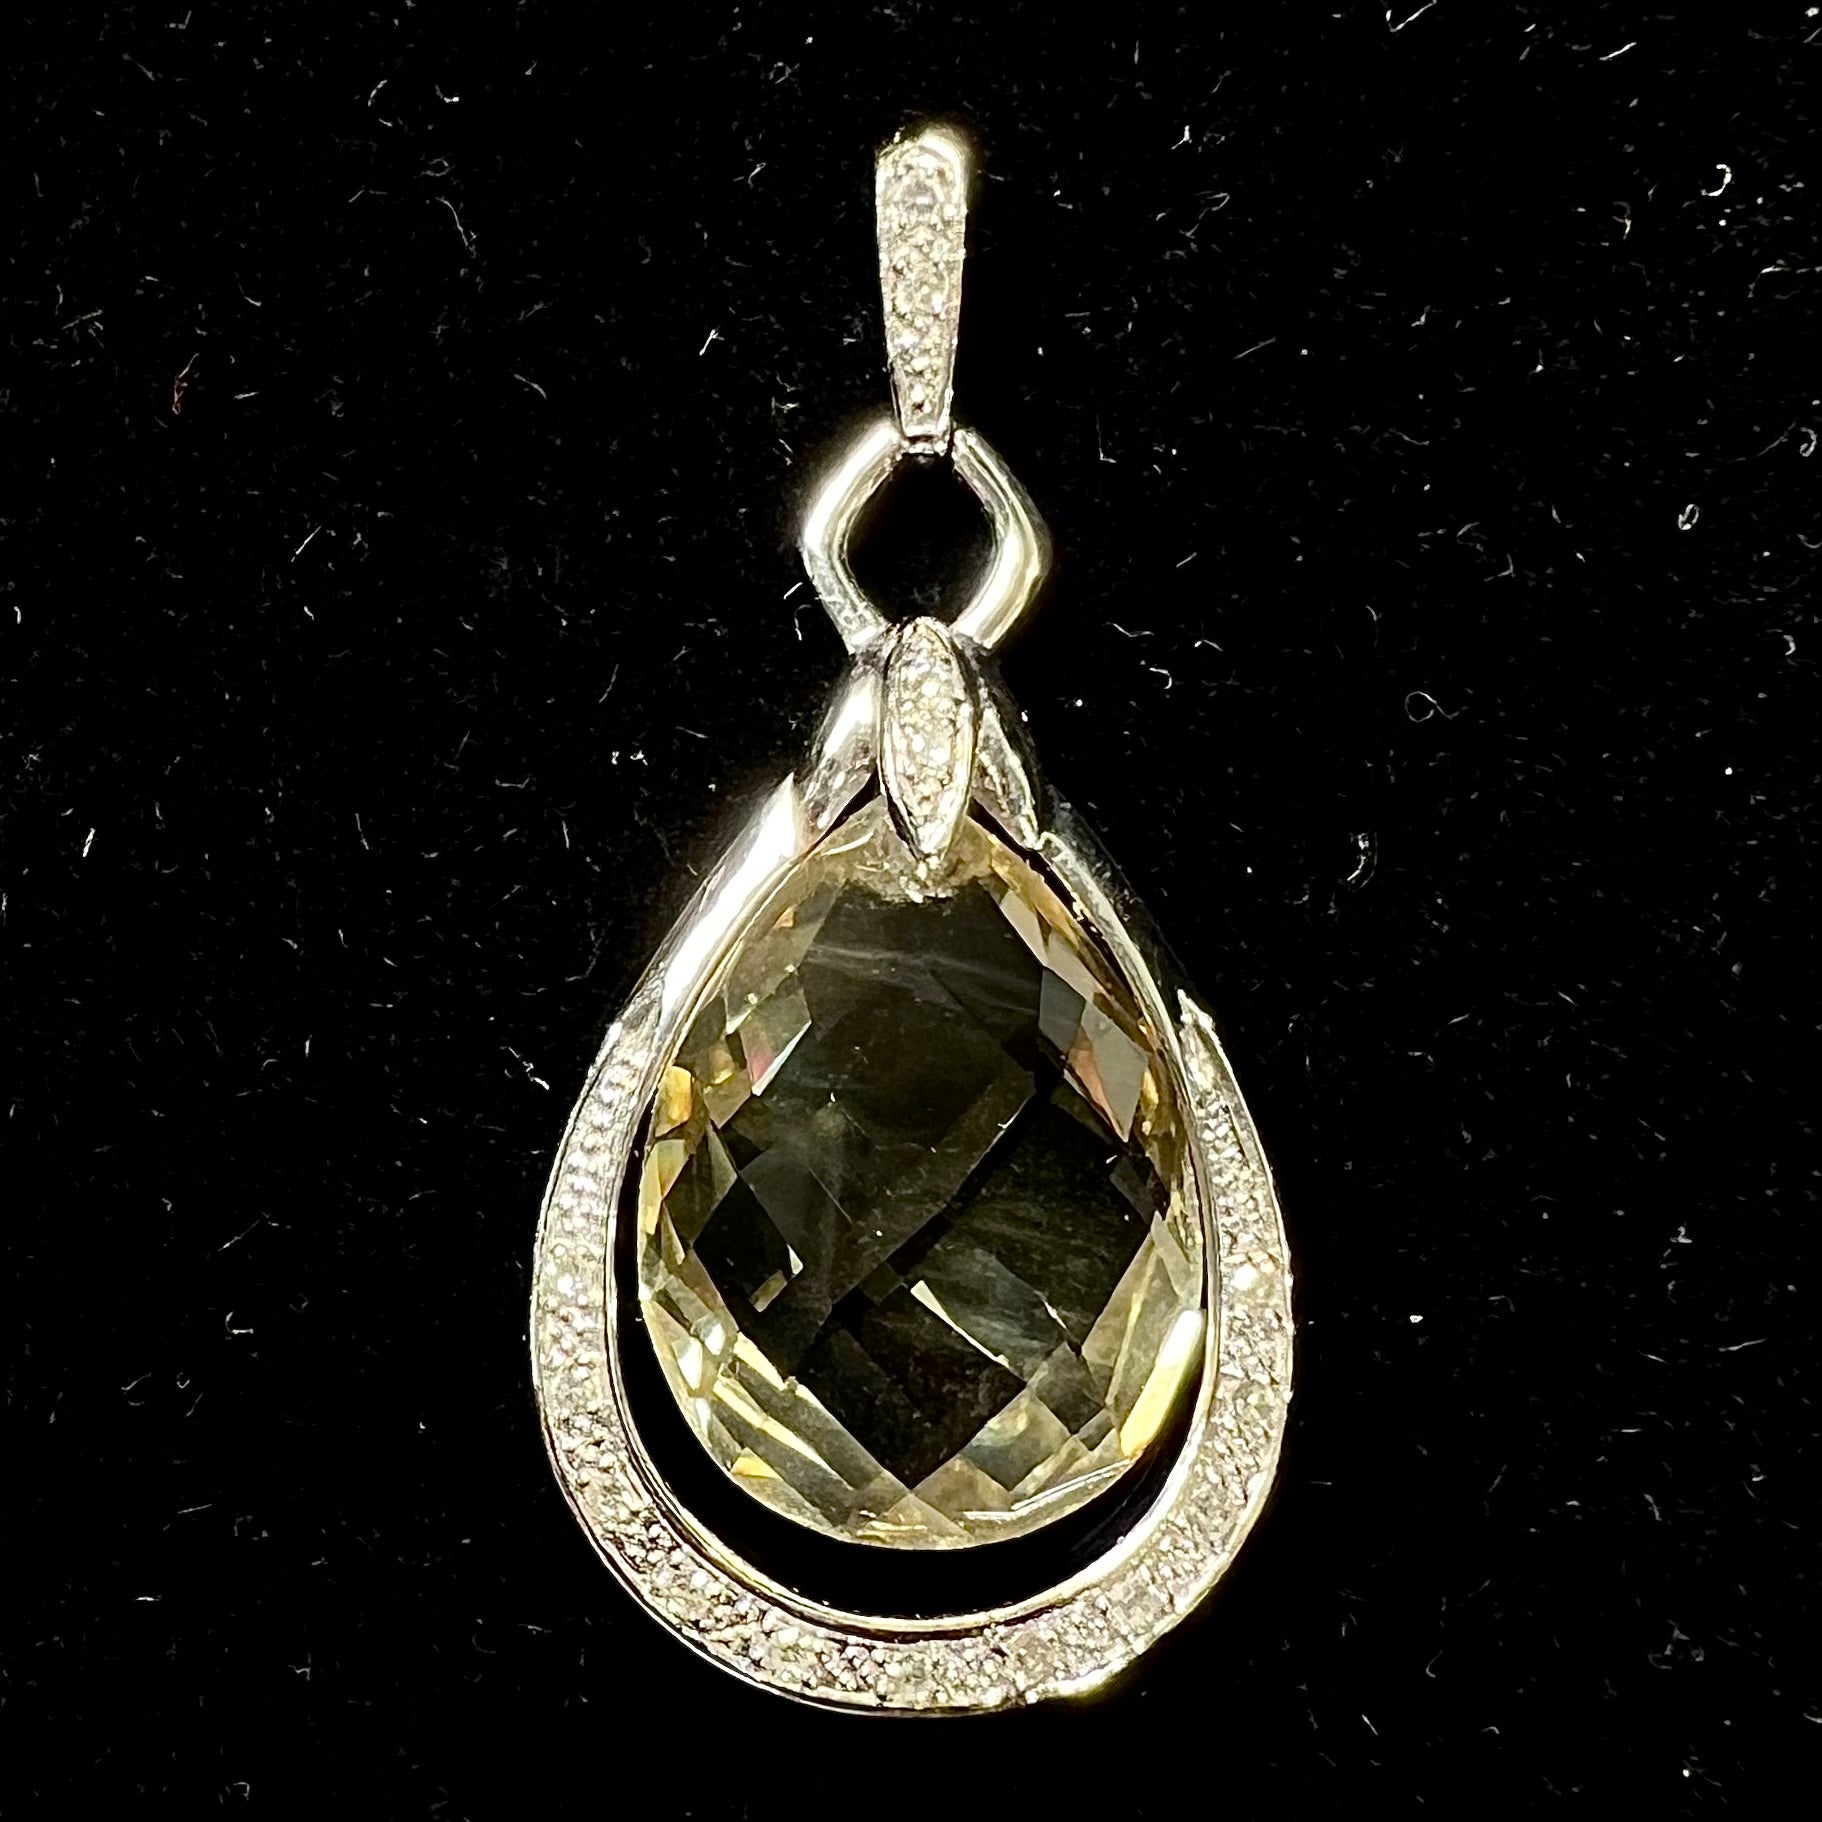 A ladies' white gold pendant set with diamonds and a faceted brilloette cut yellowish green heliodor beryl stone.